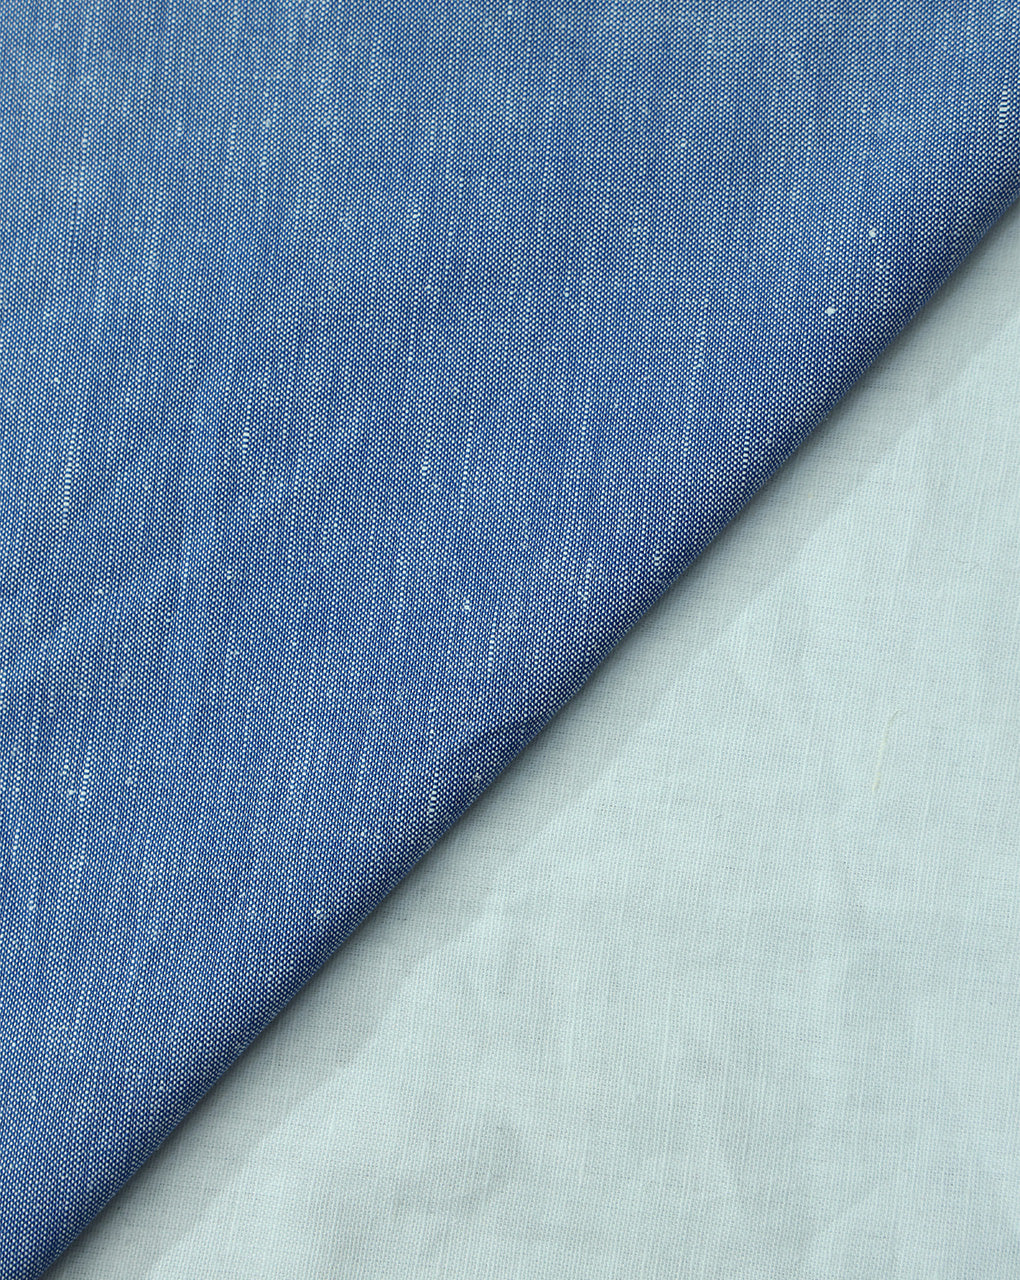 BLUE LINEN SUITING FABRIC